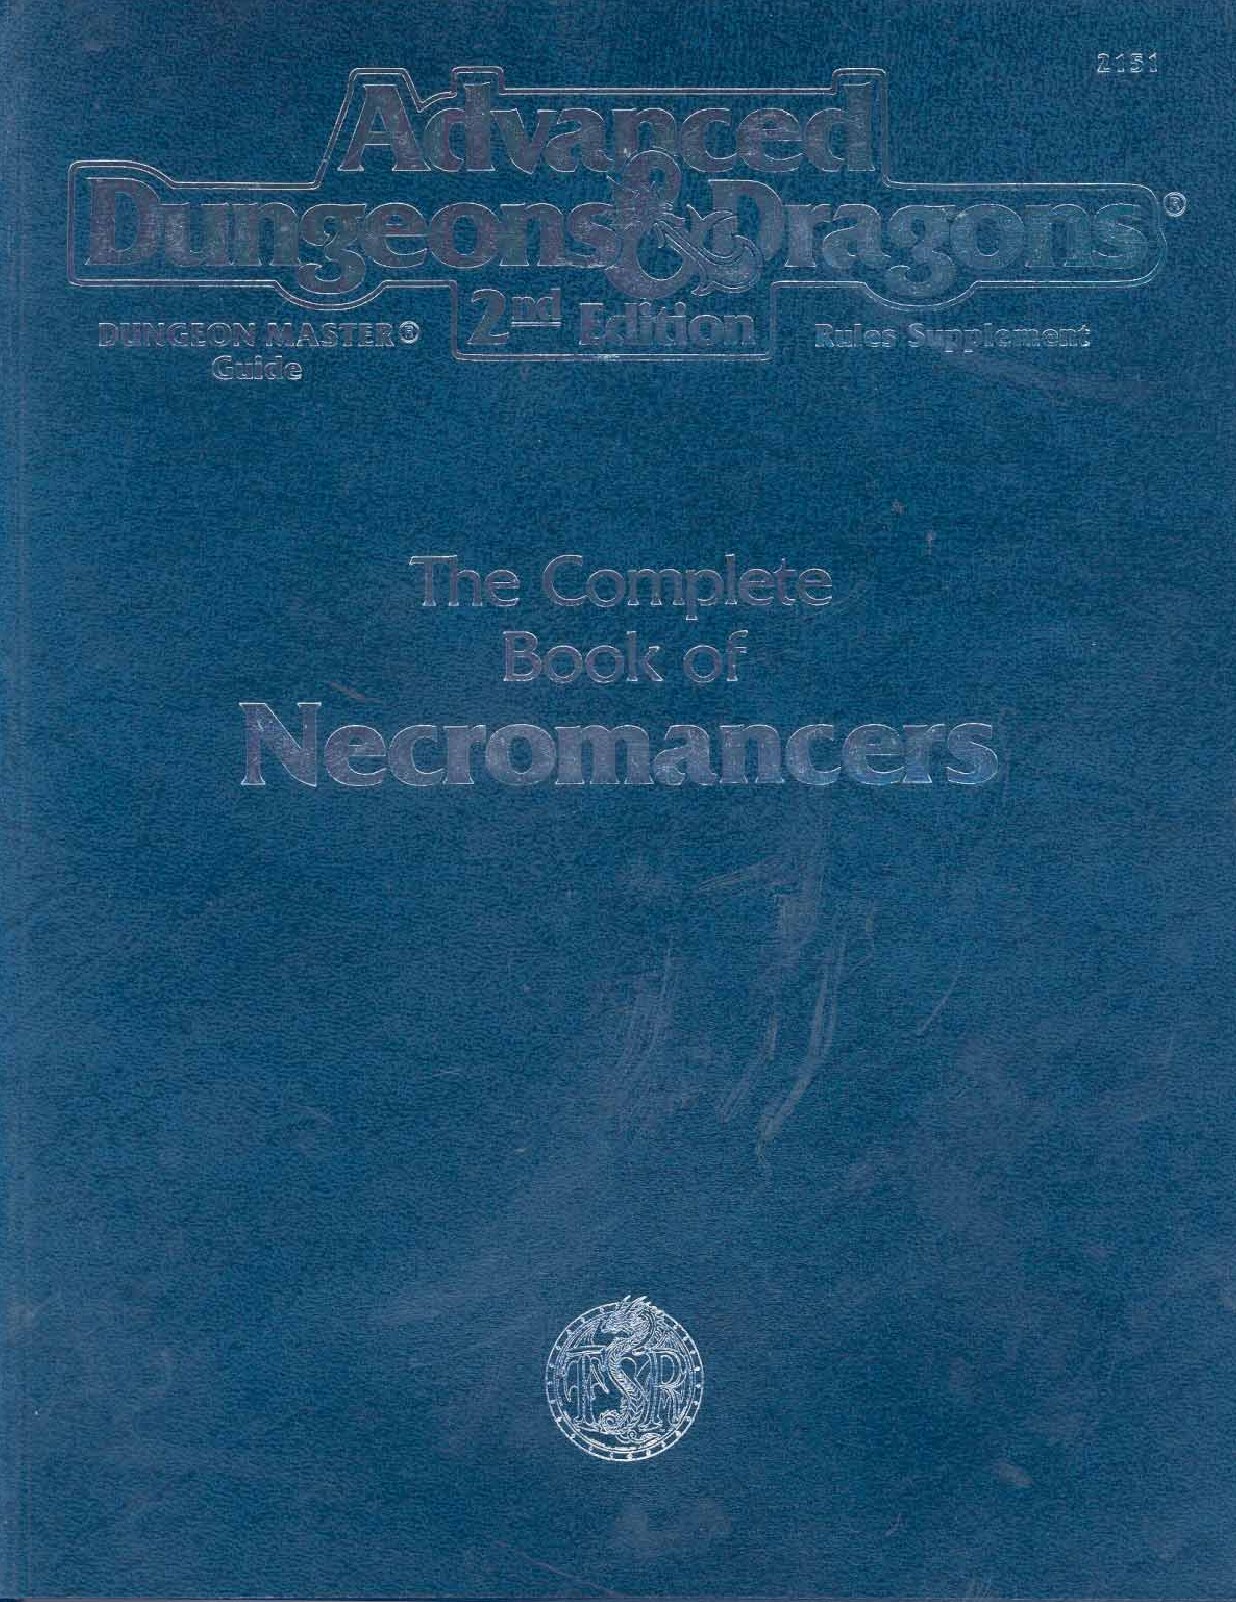 DMGR7 - Complete Book of Necromancers, The